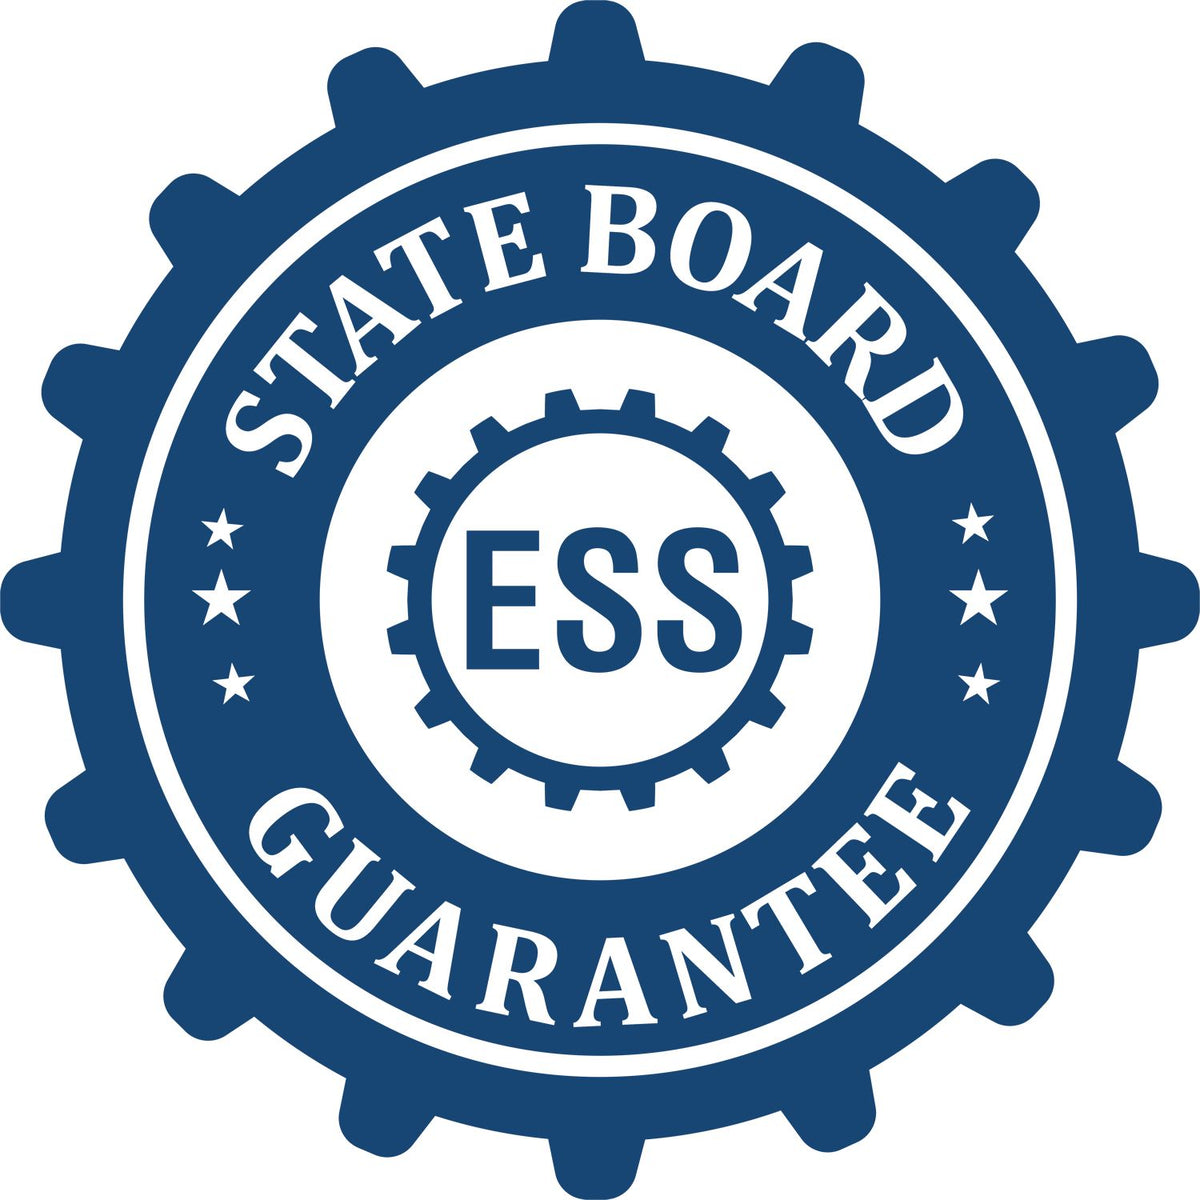 Xstamper Geologist Pre-Inked Rubber Stamp of Seal 3038GEO State Board Guarantee